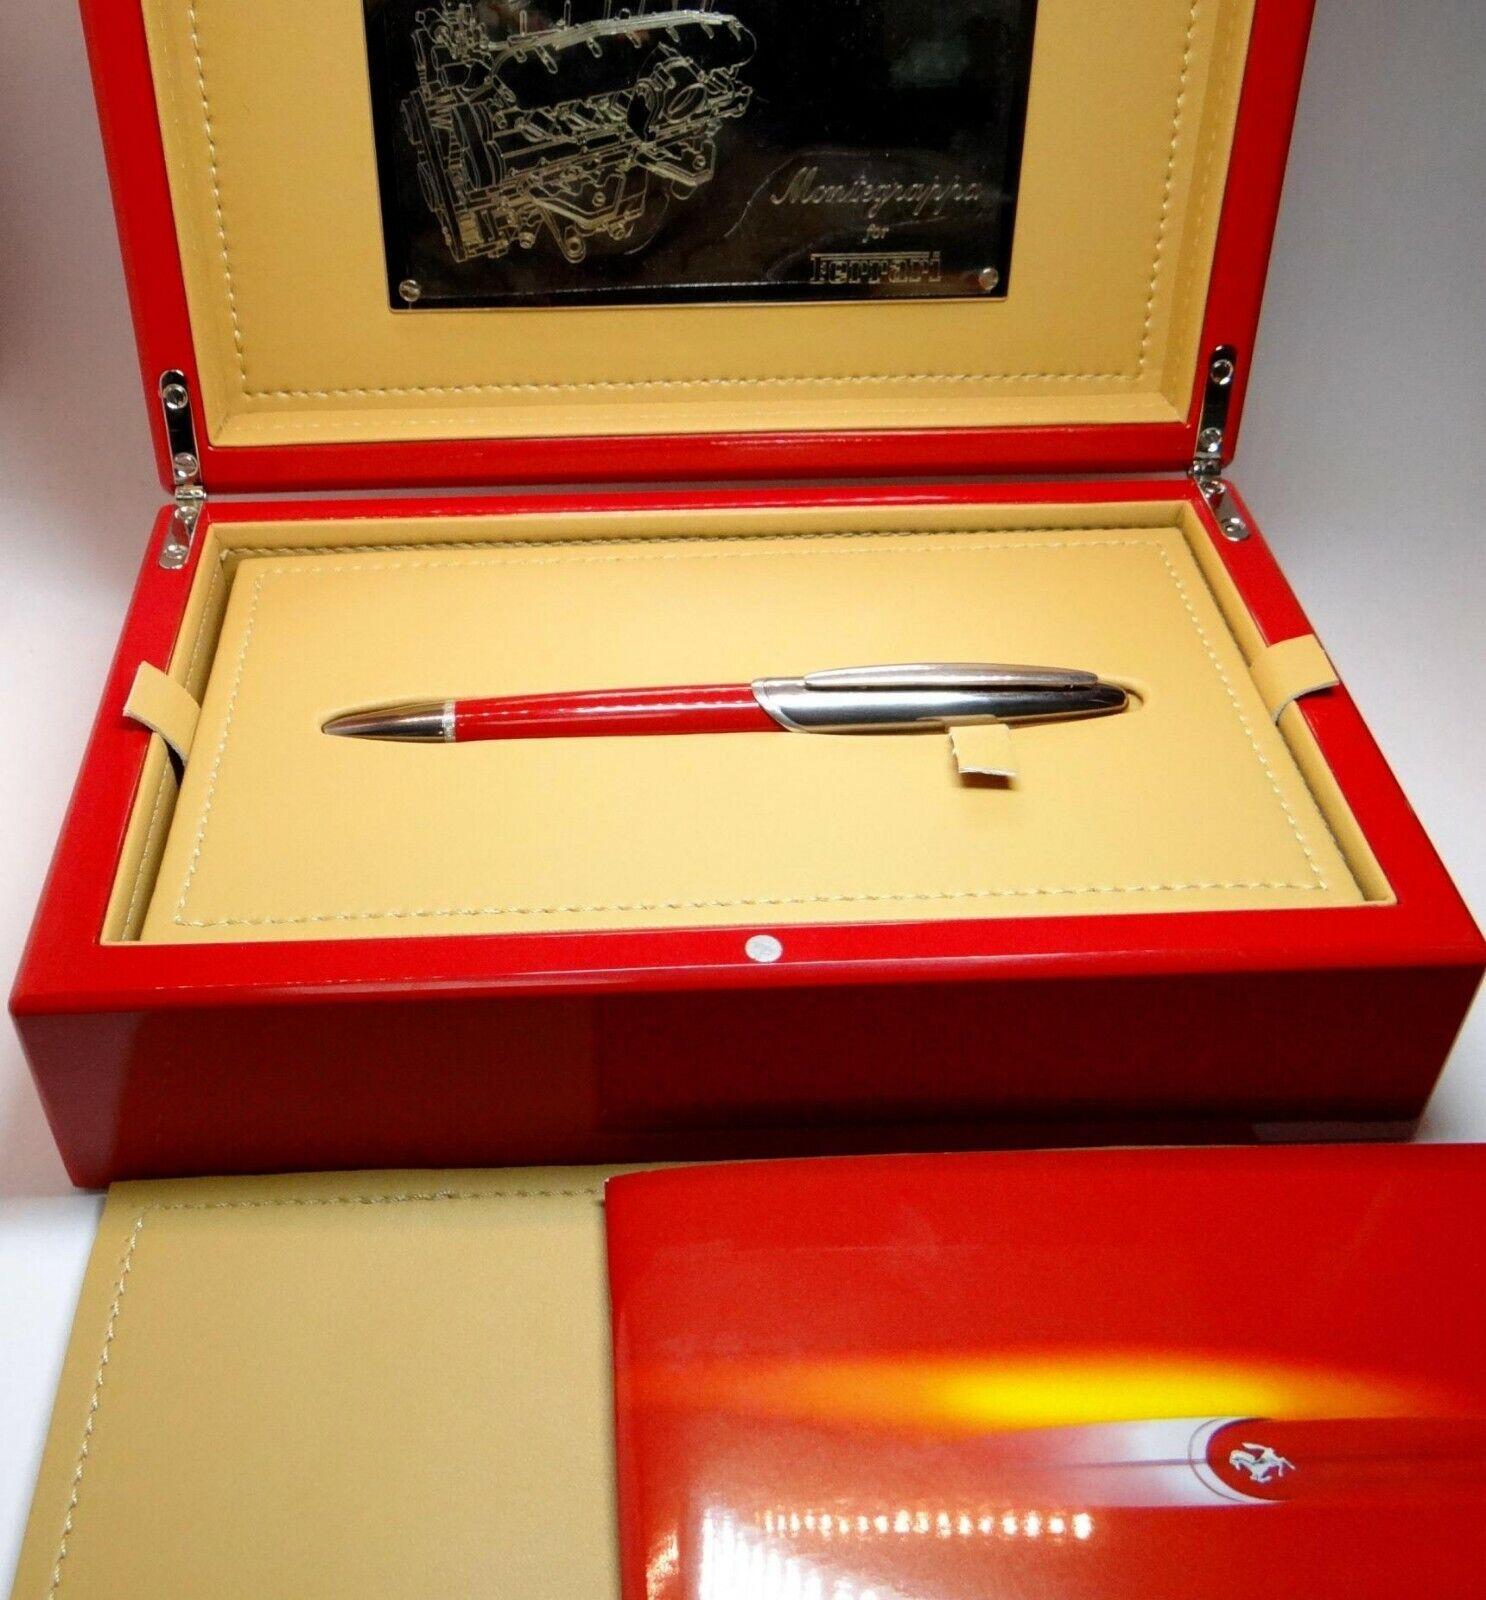 Original Montegrappa for Ferrari fountain pen with a golden key 18K Nib with the original box and papers. The ink is black.
Pen Length: 15.5 cm or 6.1 inches. 
The item is pre-owned, in excellent condition.